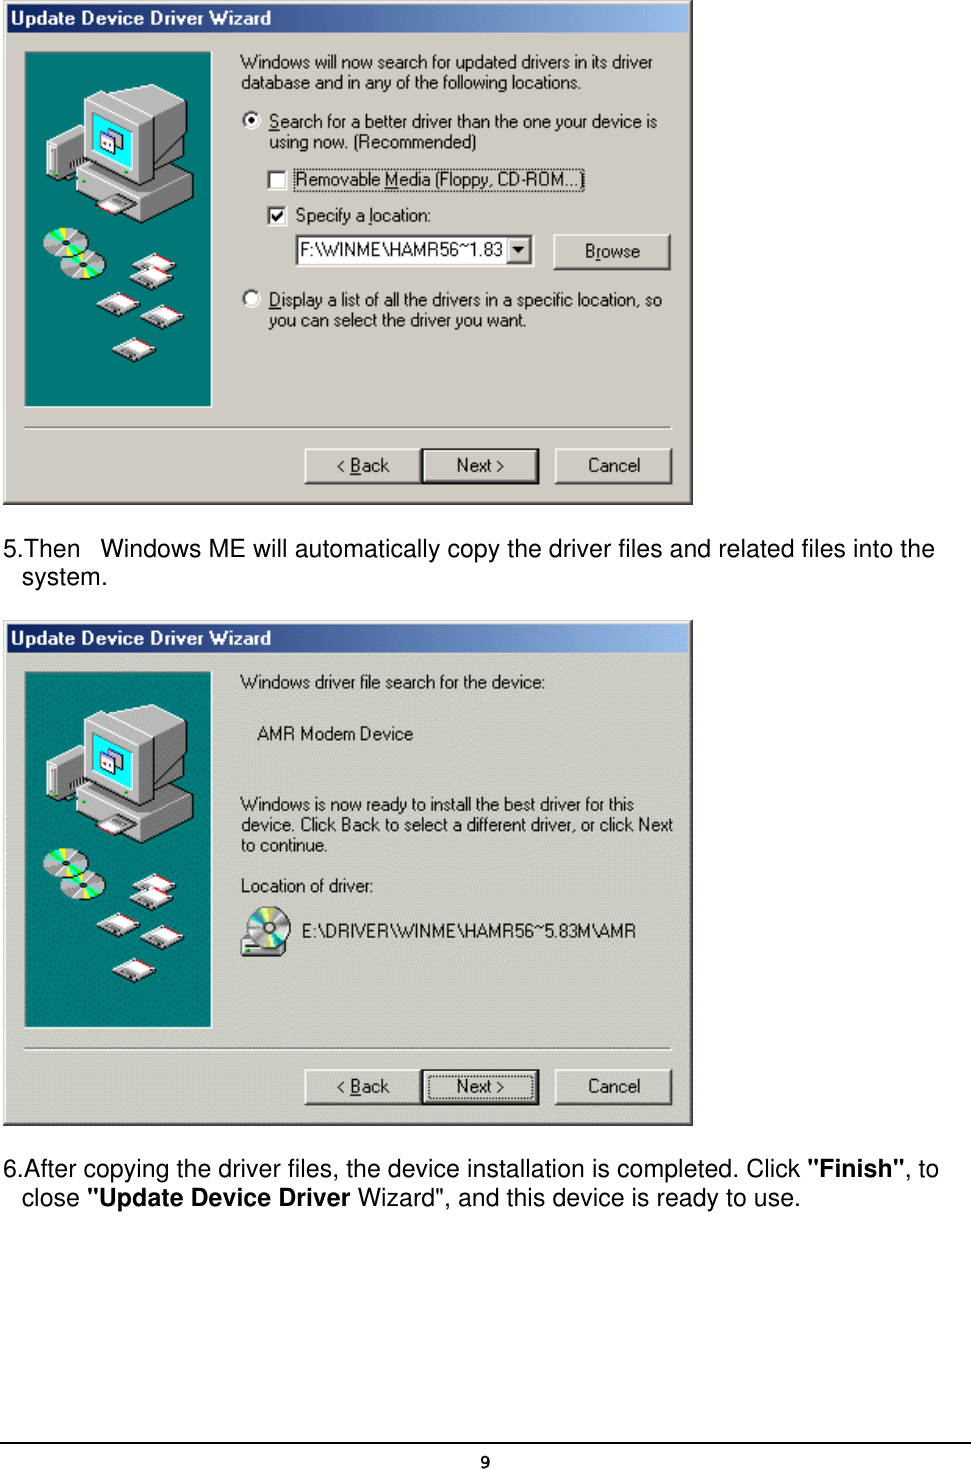   9 5.Then   Windows ME will automatically copy the driver files and related files into the system.   6.After copying the driver files, the device installation is completed. Click &quot;Finish&quot;, to close &quot;Update Device Driver Wizard&quot;, and this device is ready to use.   